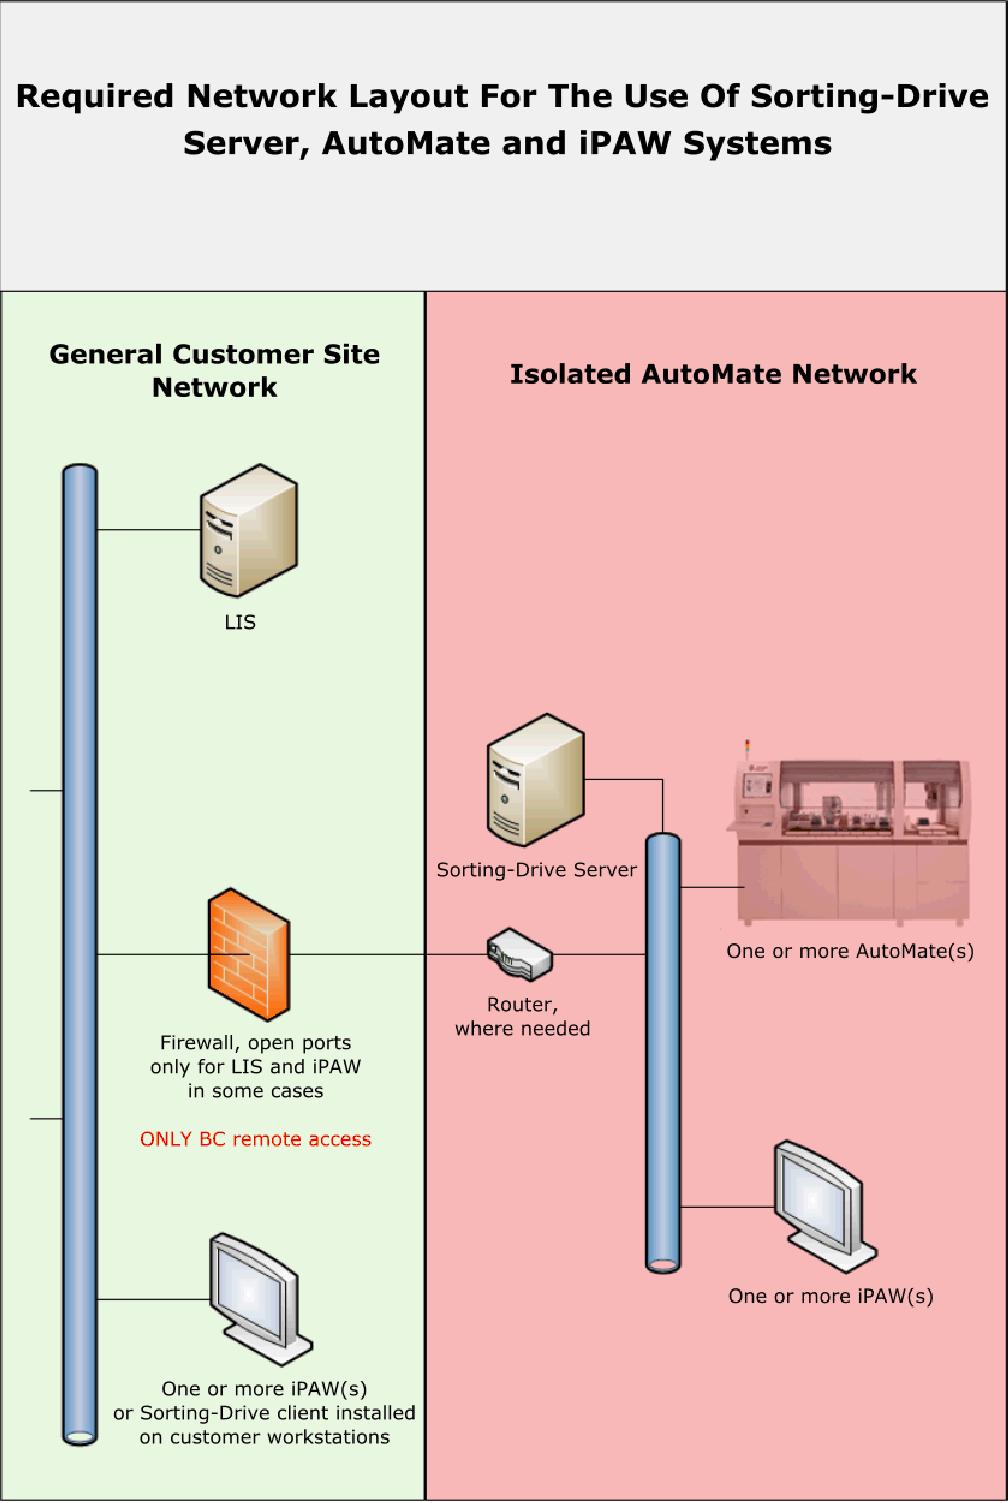 Recommended Network Layout It is strongly recommended that the following network layout is used to ensure that